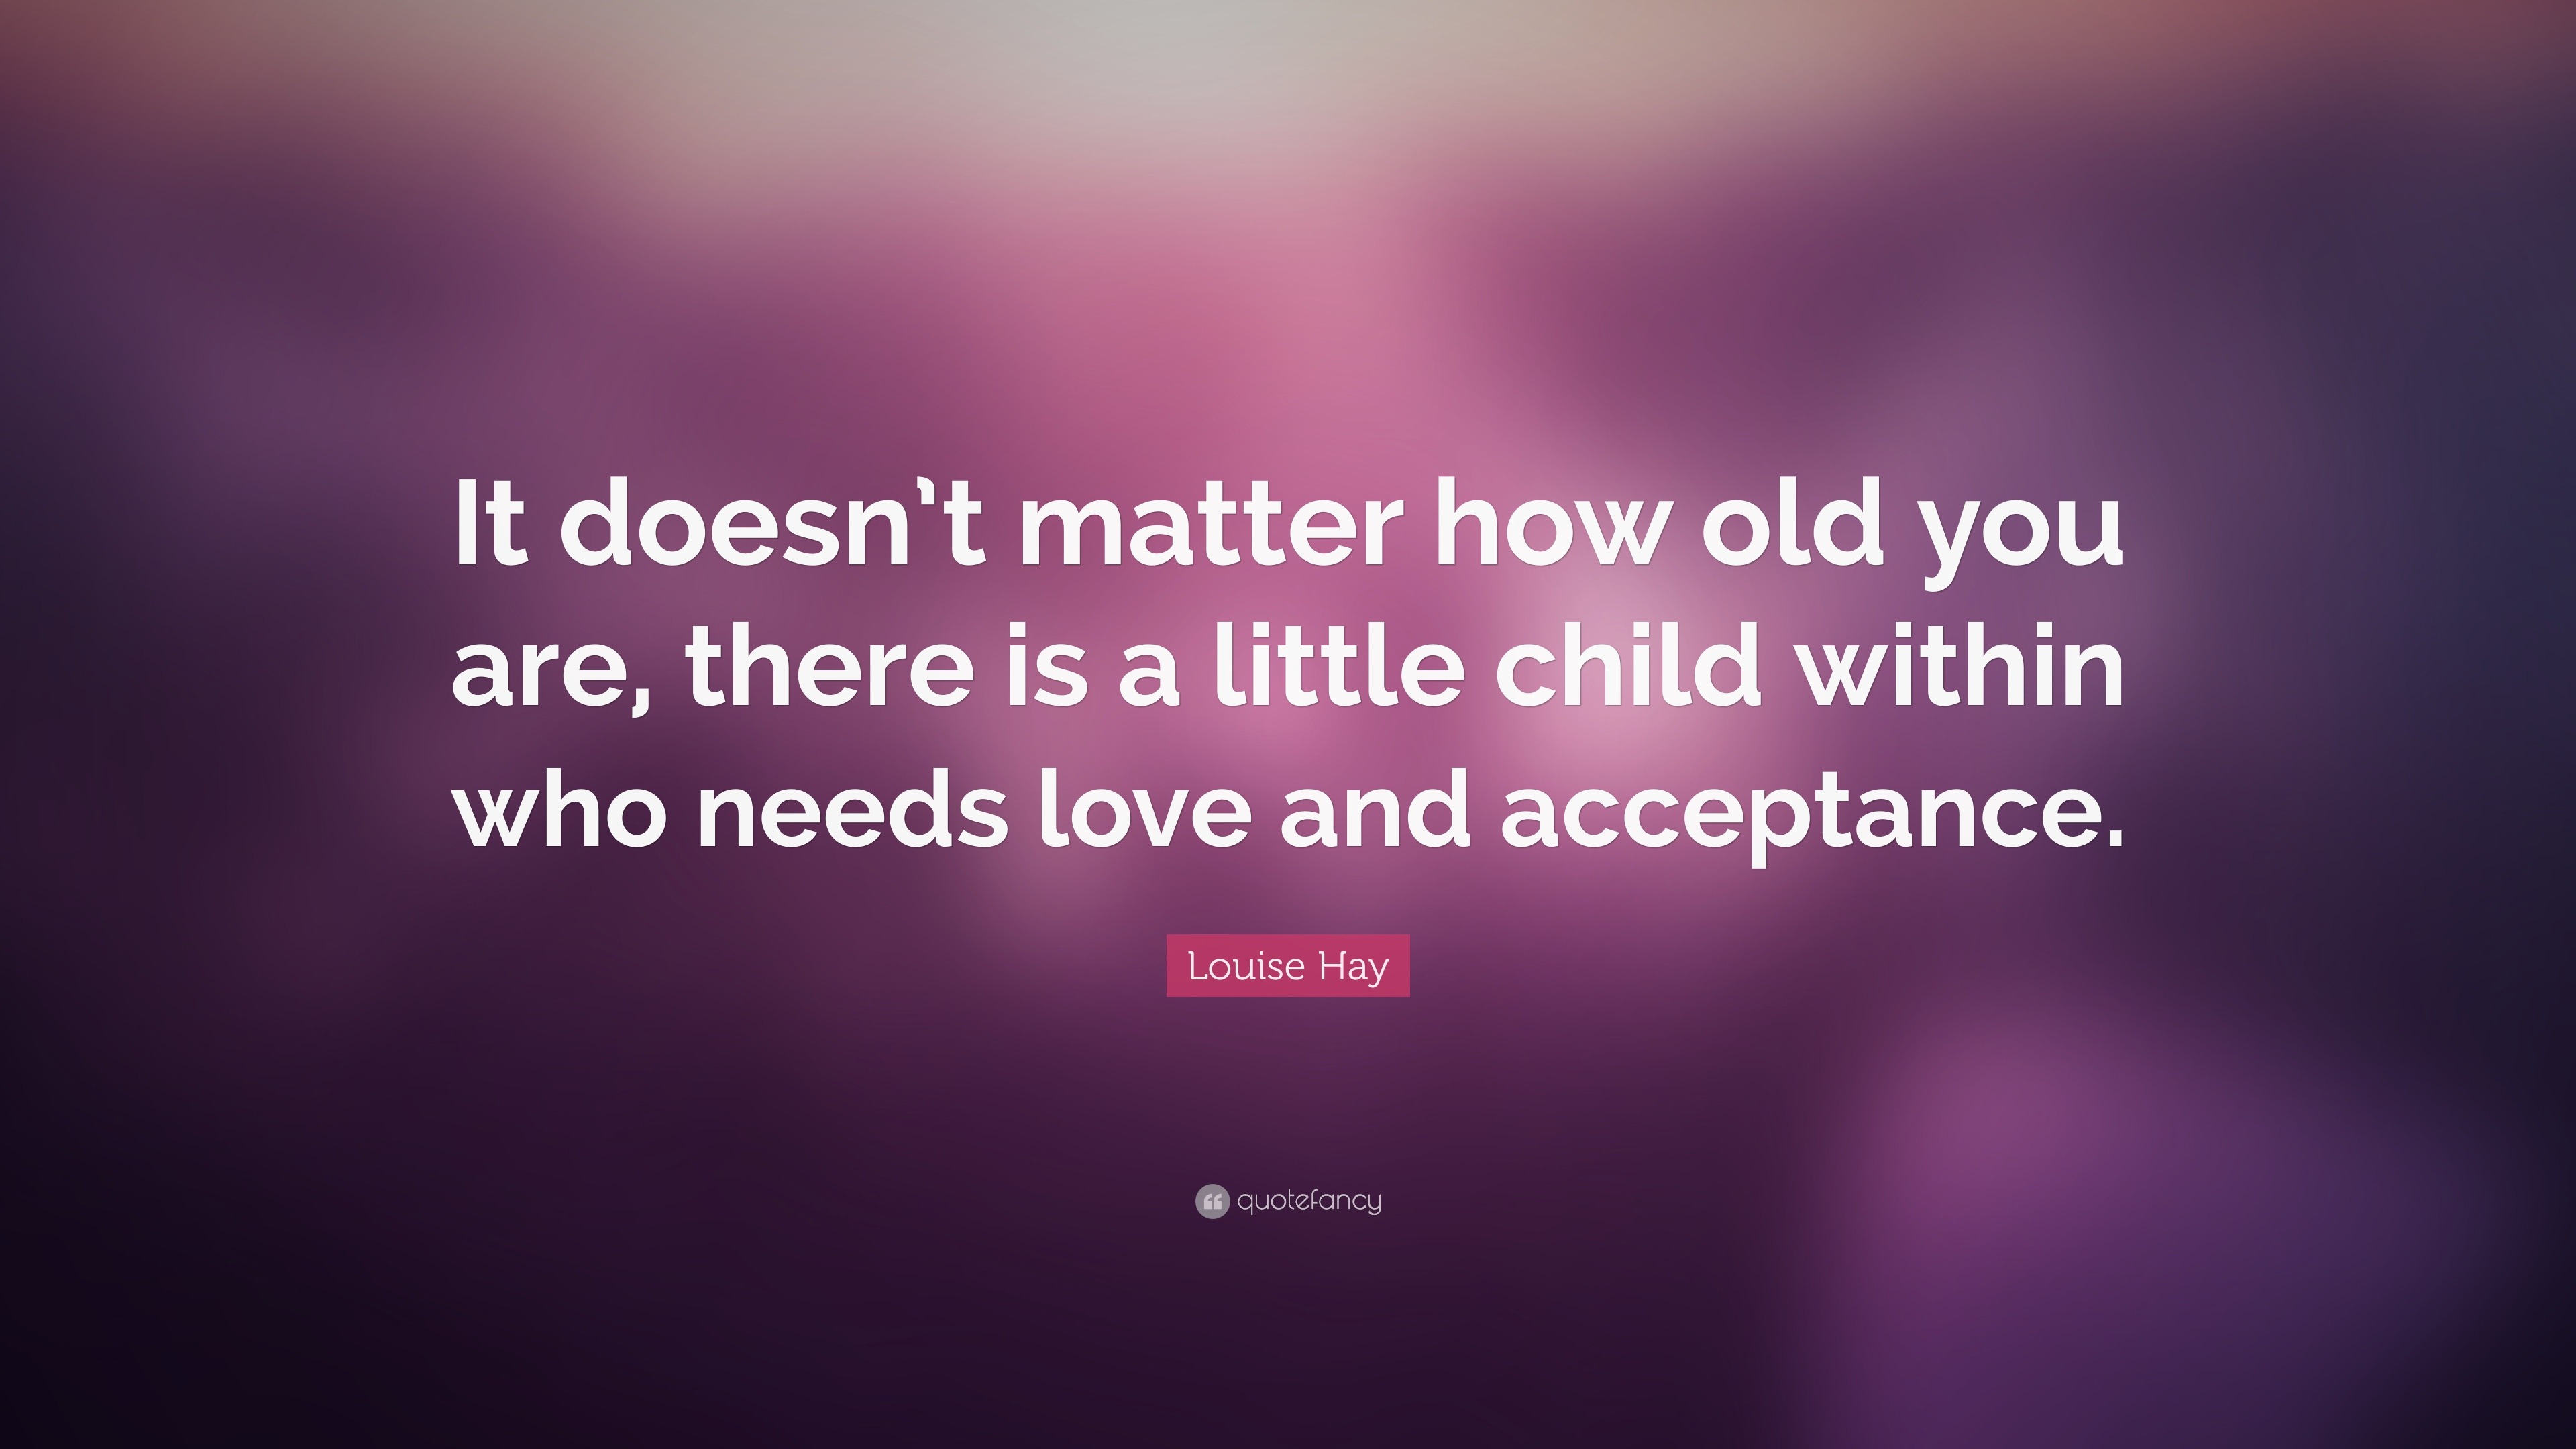 Louise Hay Quote: “It doesn’t matter how old you are, there is a little child ...